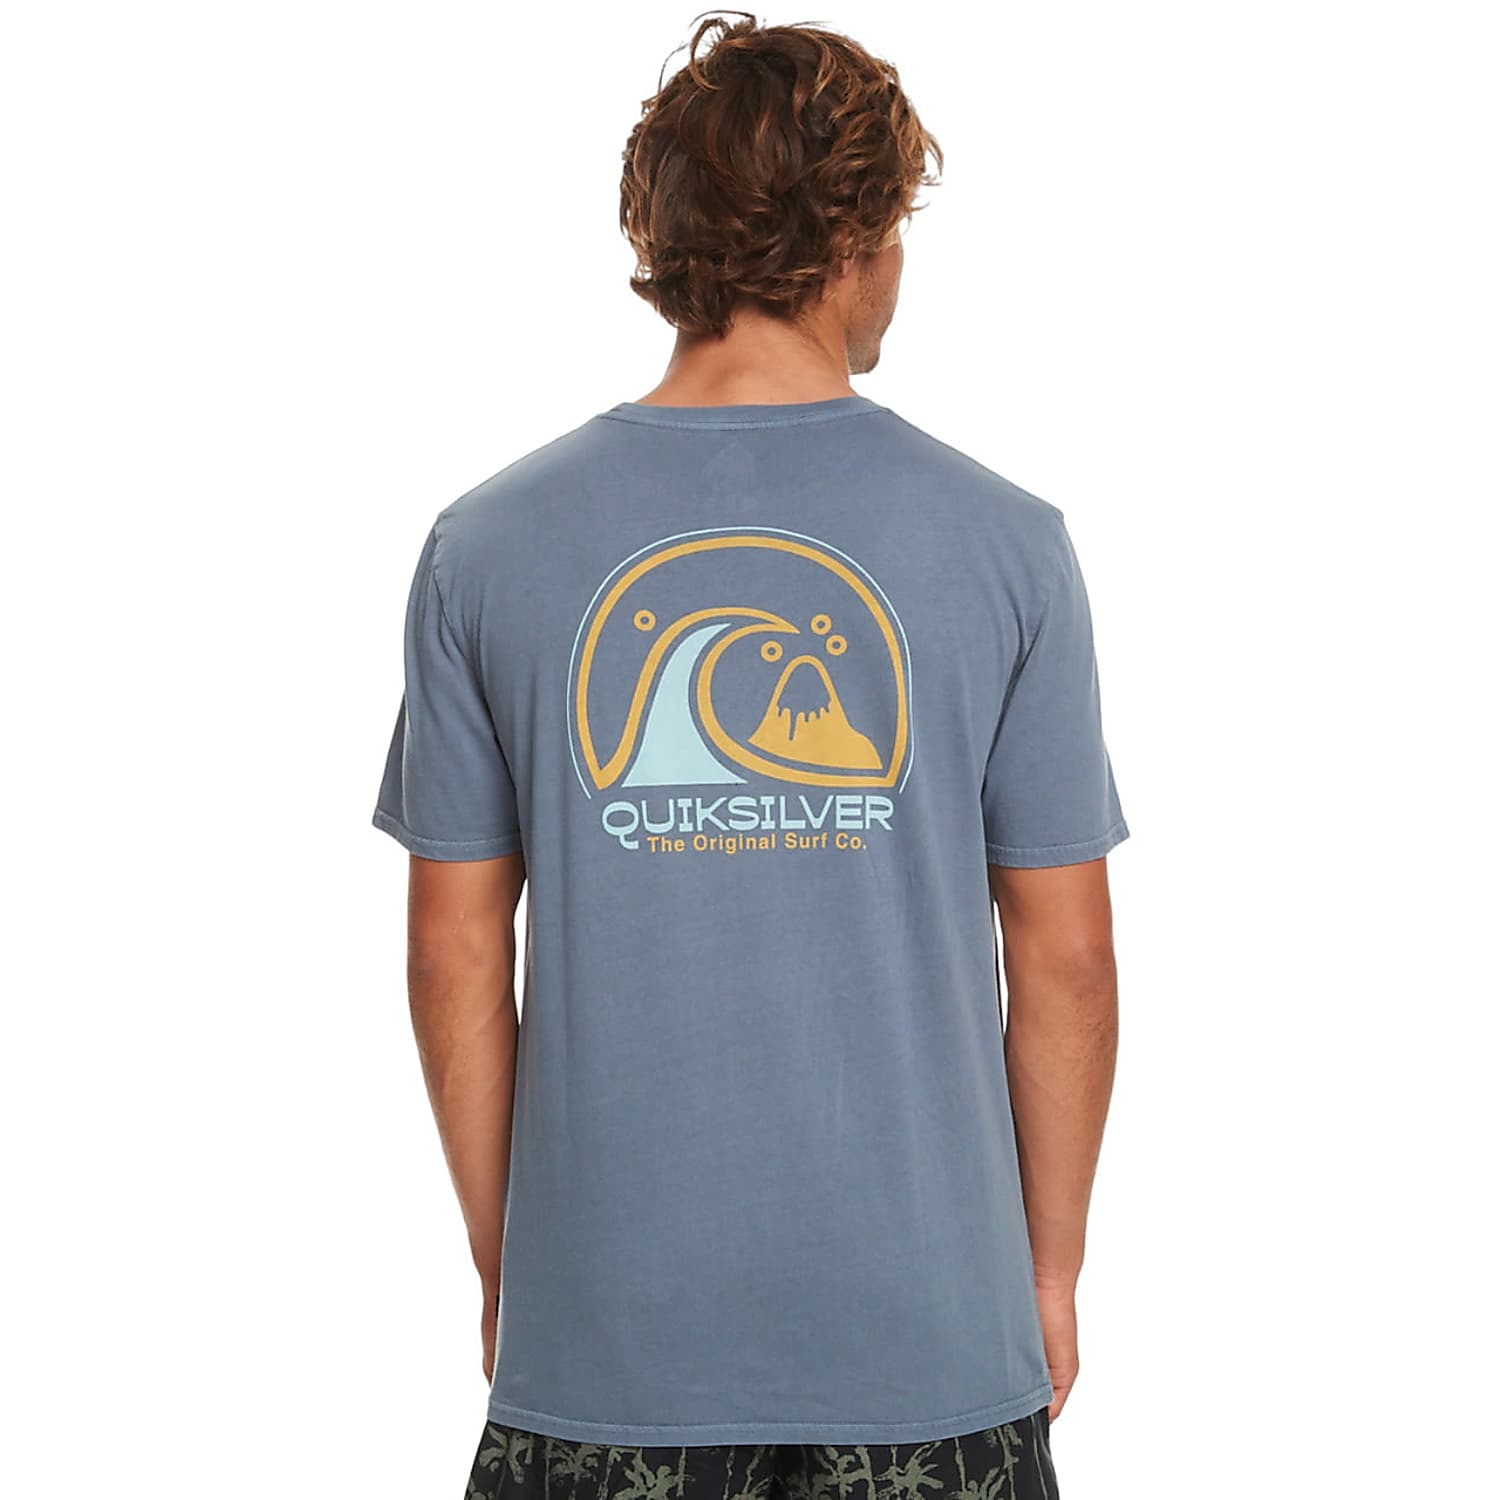 CIRCLE Quiksilver and T-SHIRT, cheap CLEAN - Fast M Sea shipping Bering